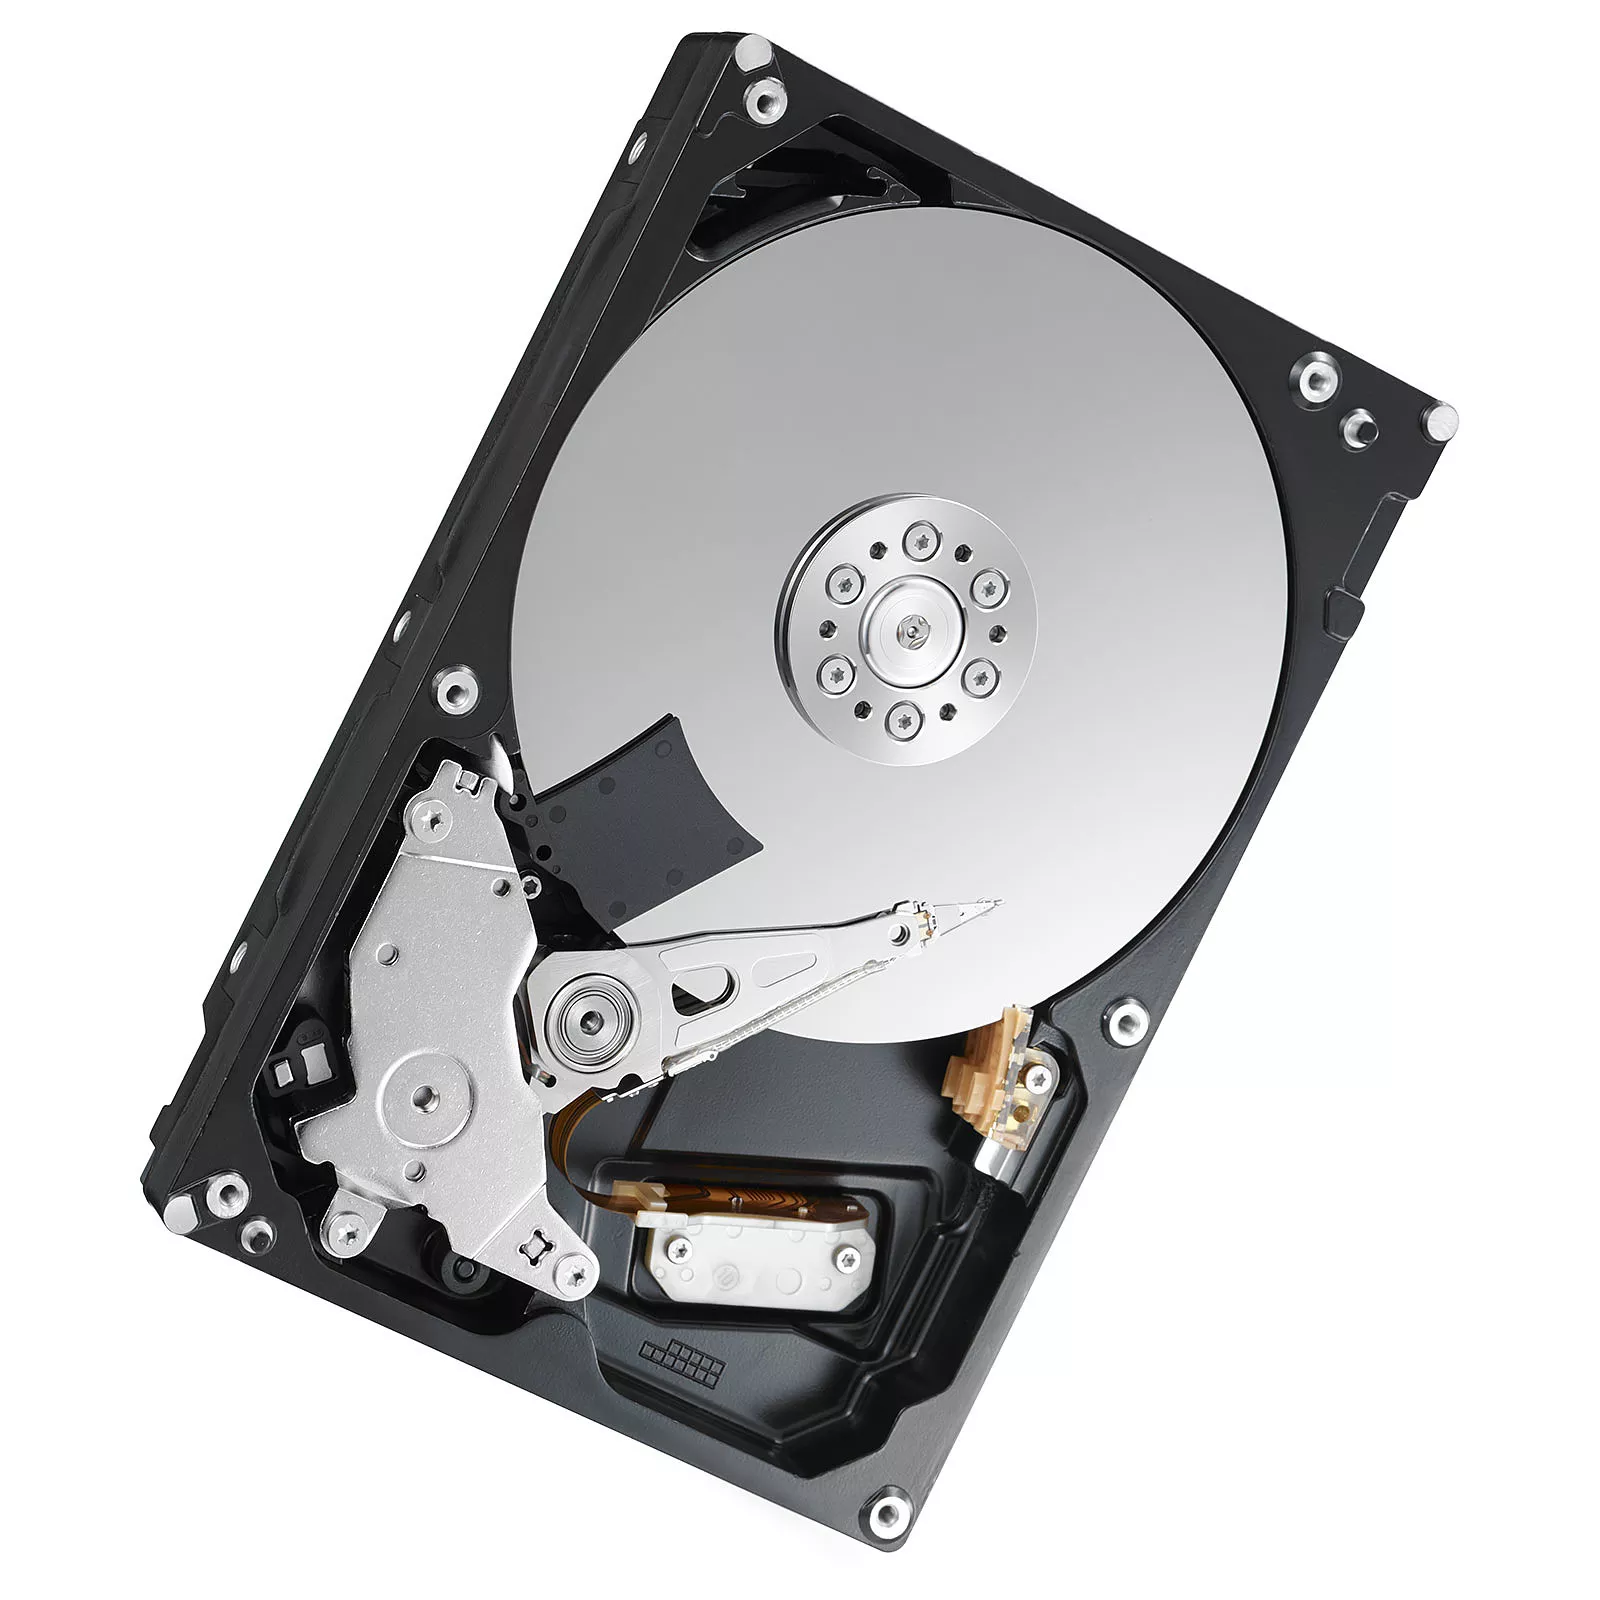 HDD TOSHIBA P300 3.5" 1To 7200RPM 64MB CACHE